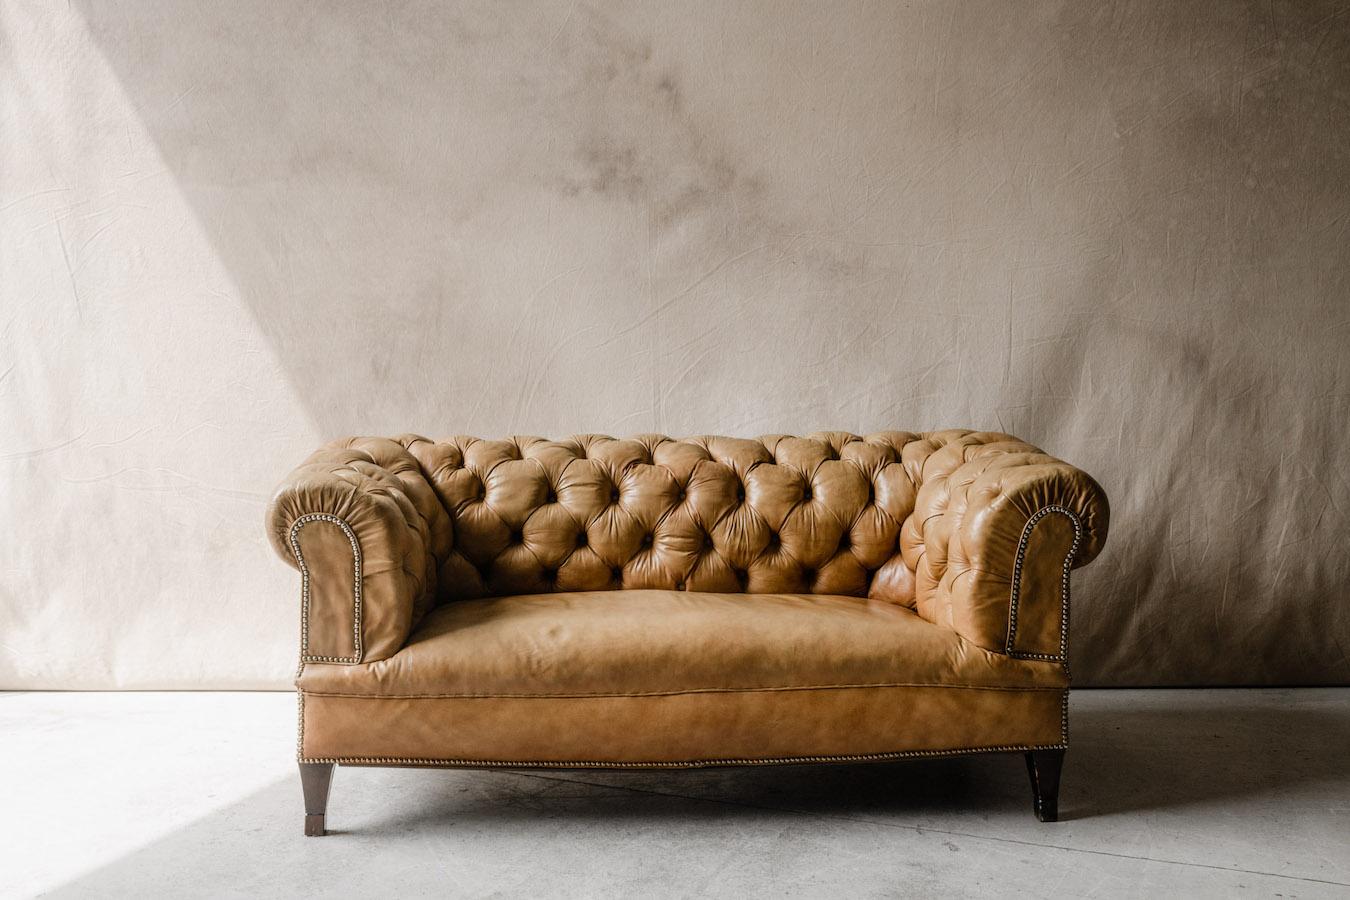 Vintage leather Chesterfield sofa from Denmark, Circa 1950. Original tan leather upholstery with nice wear and patina. Very comfortable.

     
    